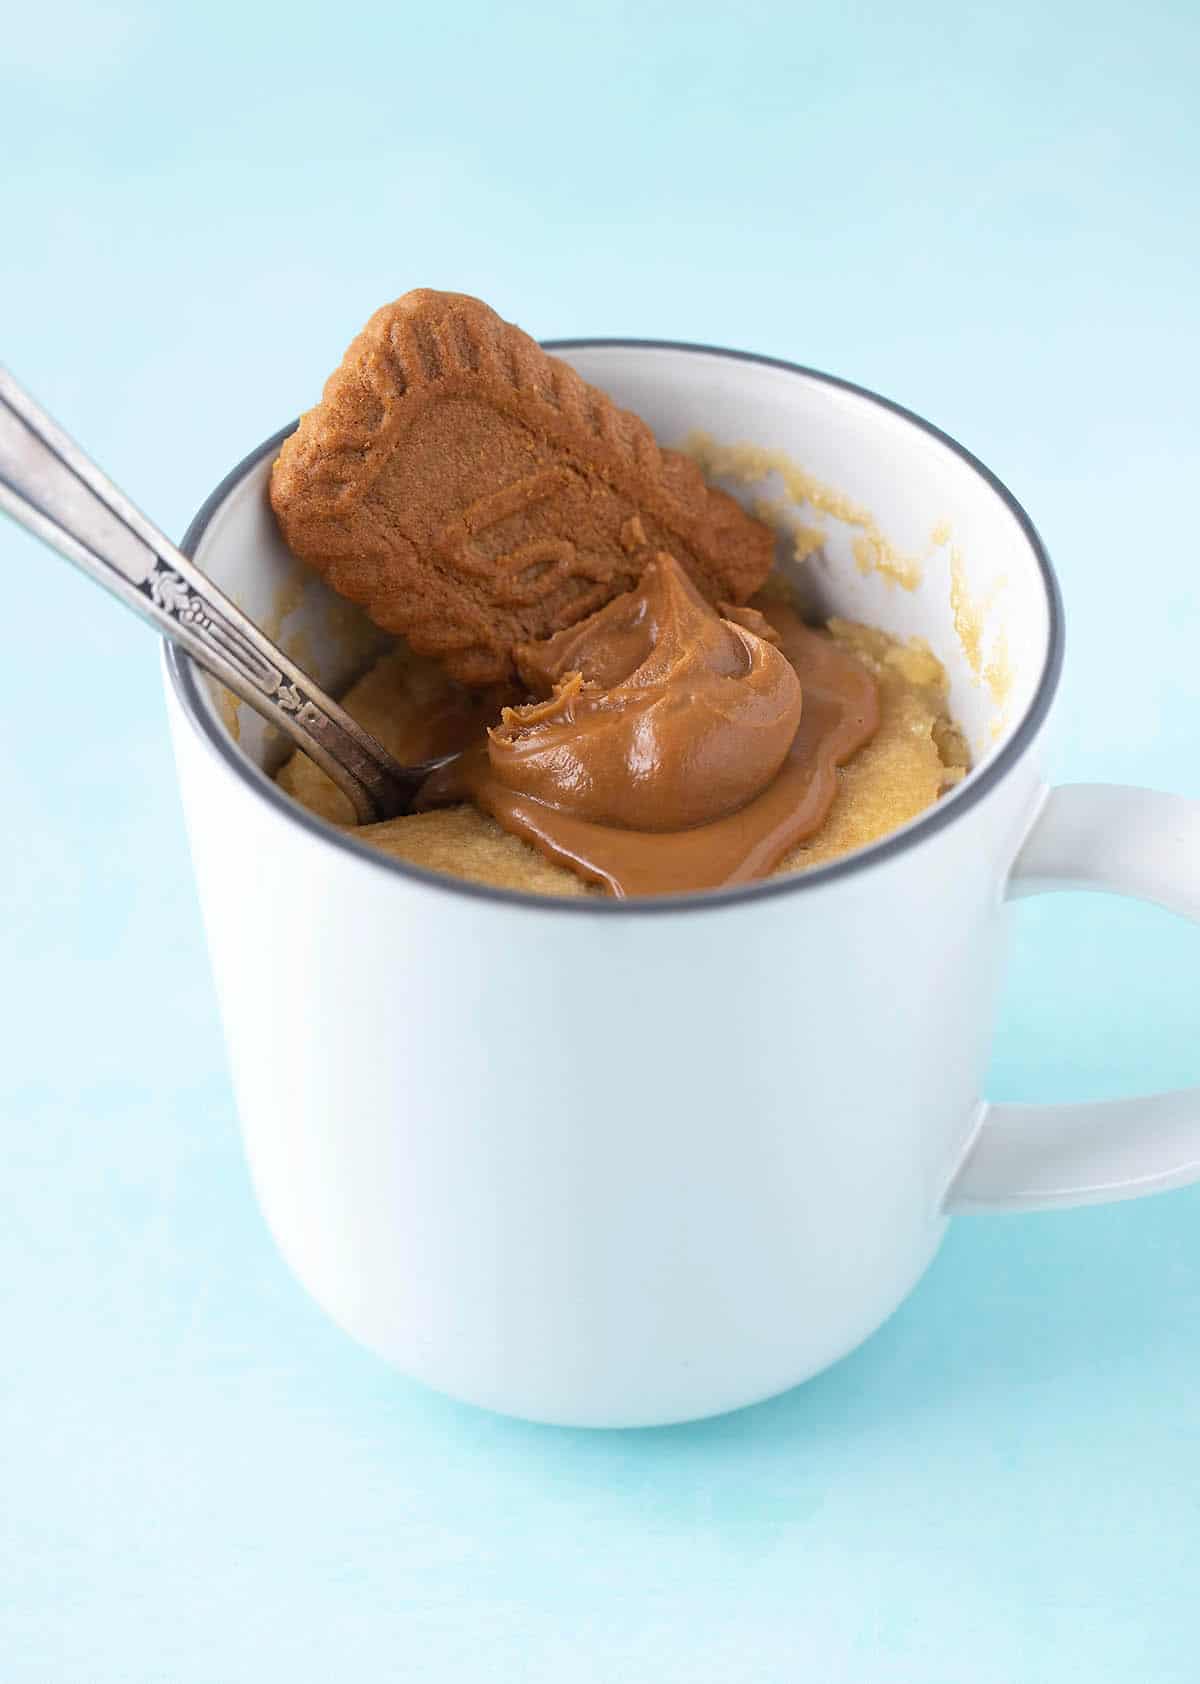 Biscoff Mug Cake topped with Biscoff on a blue background.